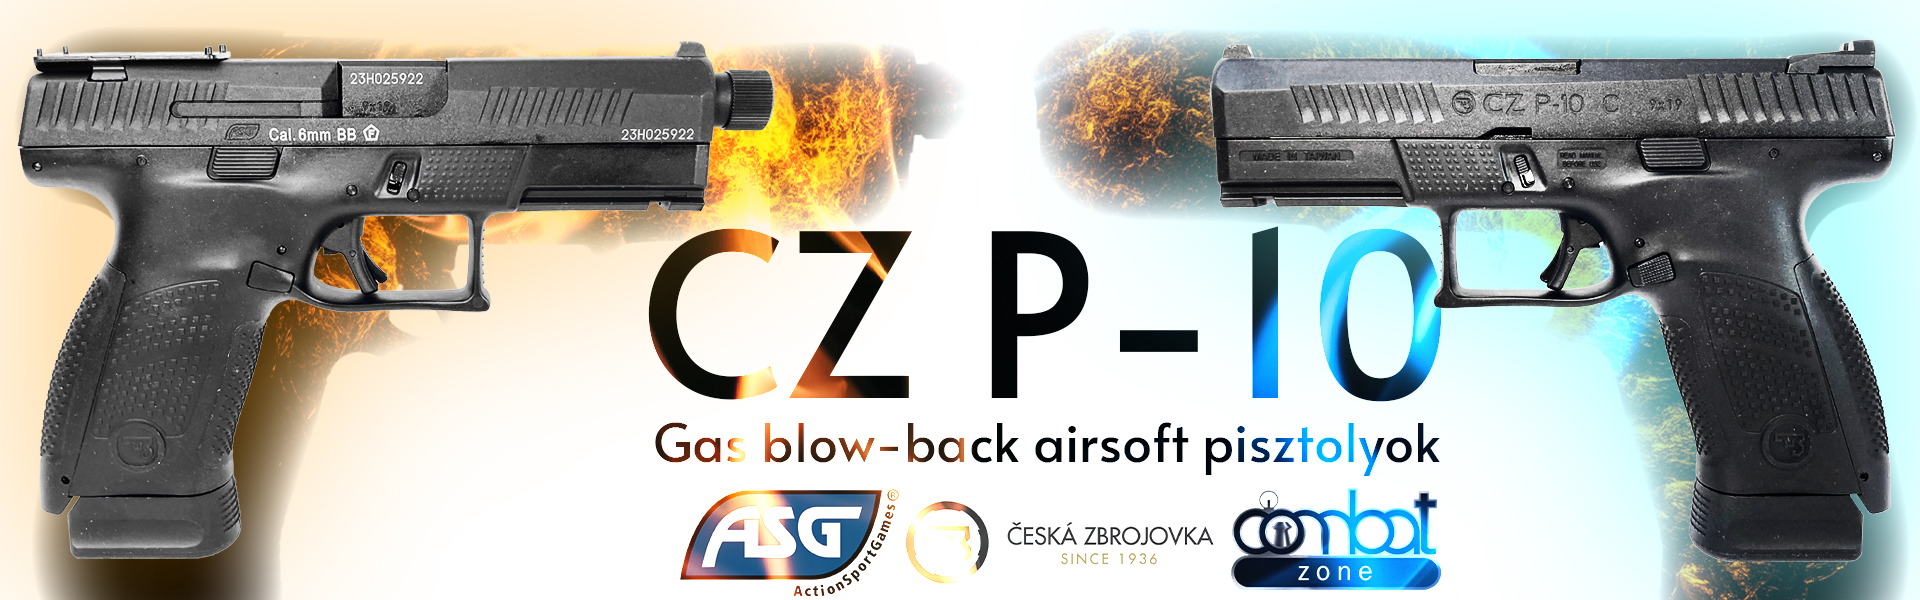 ASG CZ P-10C GBB airsoft pisztoly